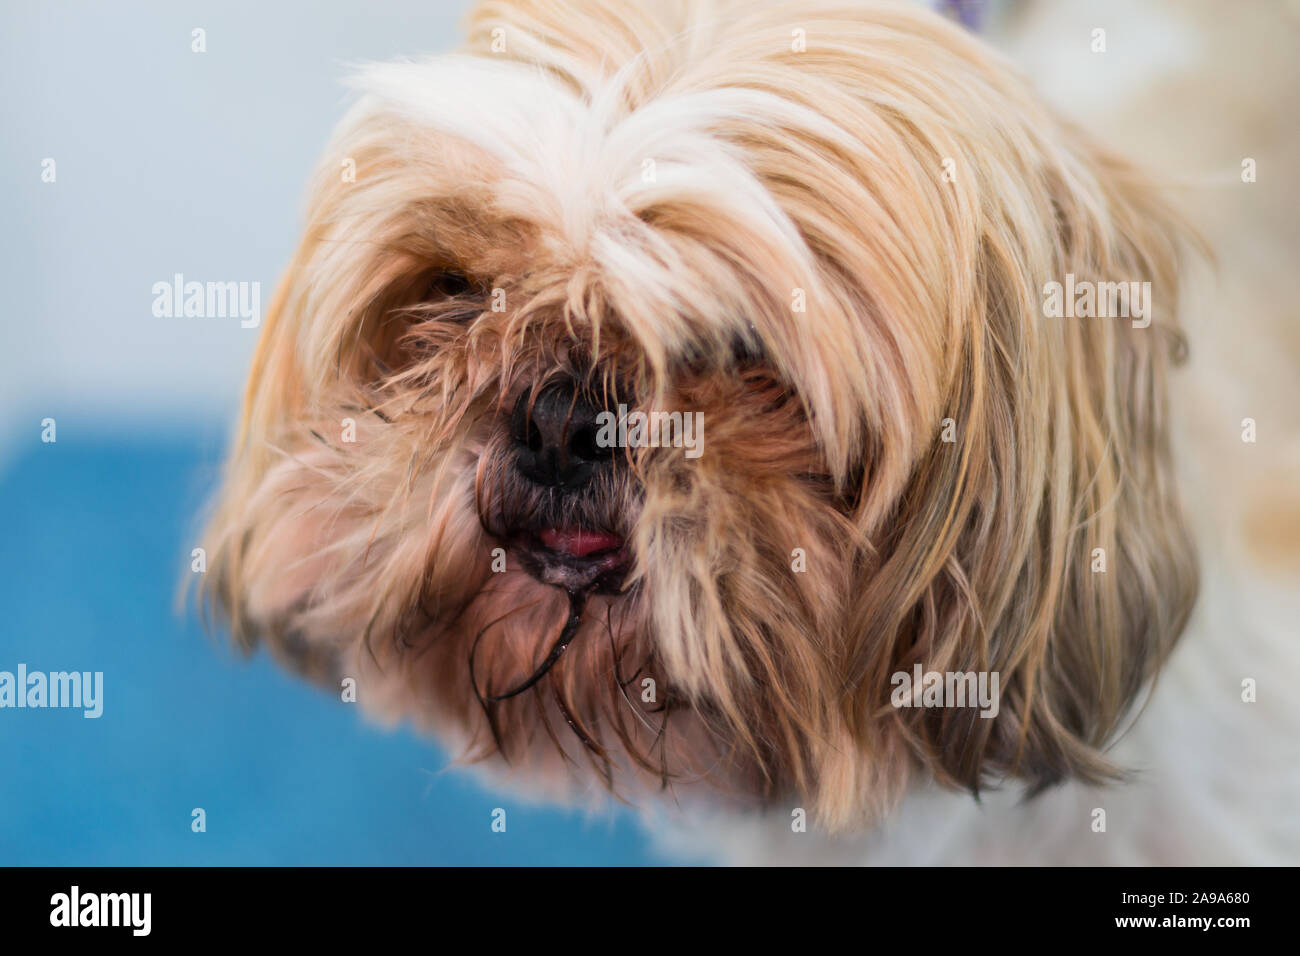 Shih-tzu dog breed with long hair on his face and tongue out Stock Photo -  Alamy